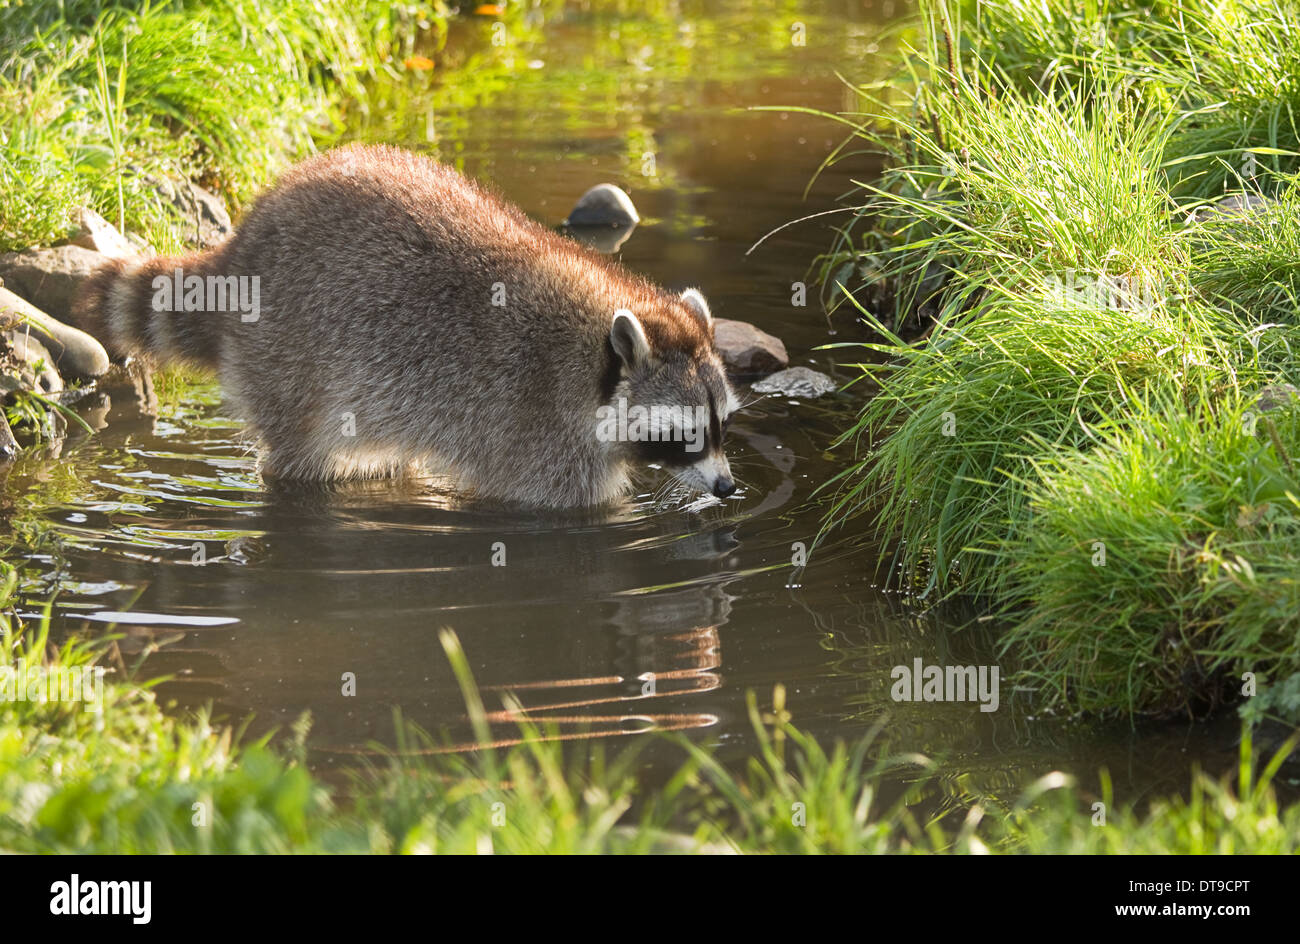 Common raccoon or Procyon lotor in evening sun searching for food in water Stock Photo